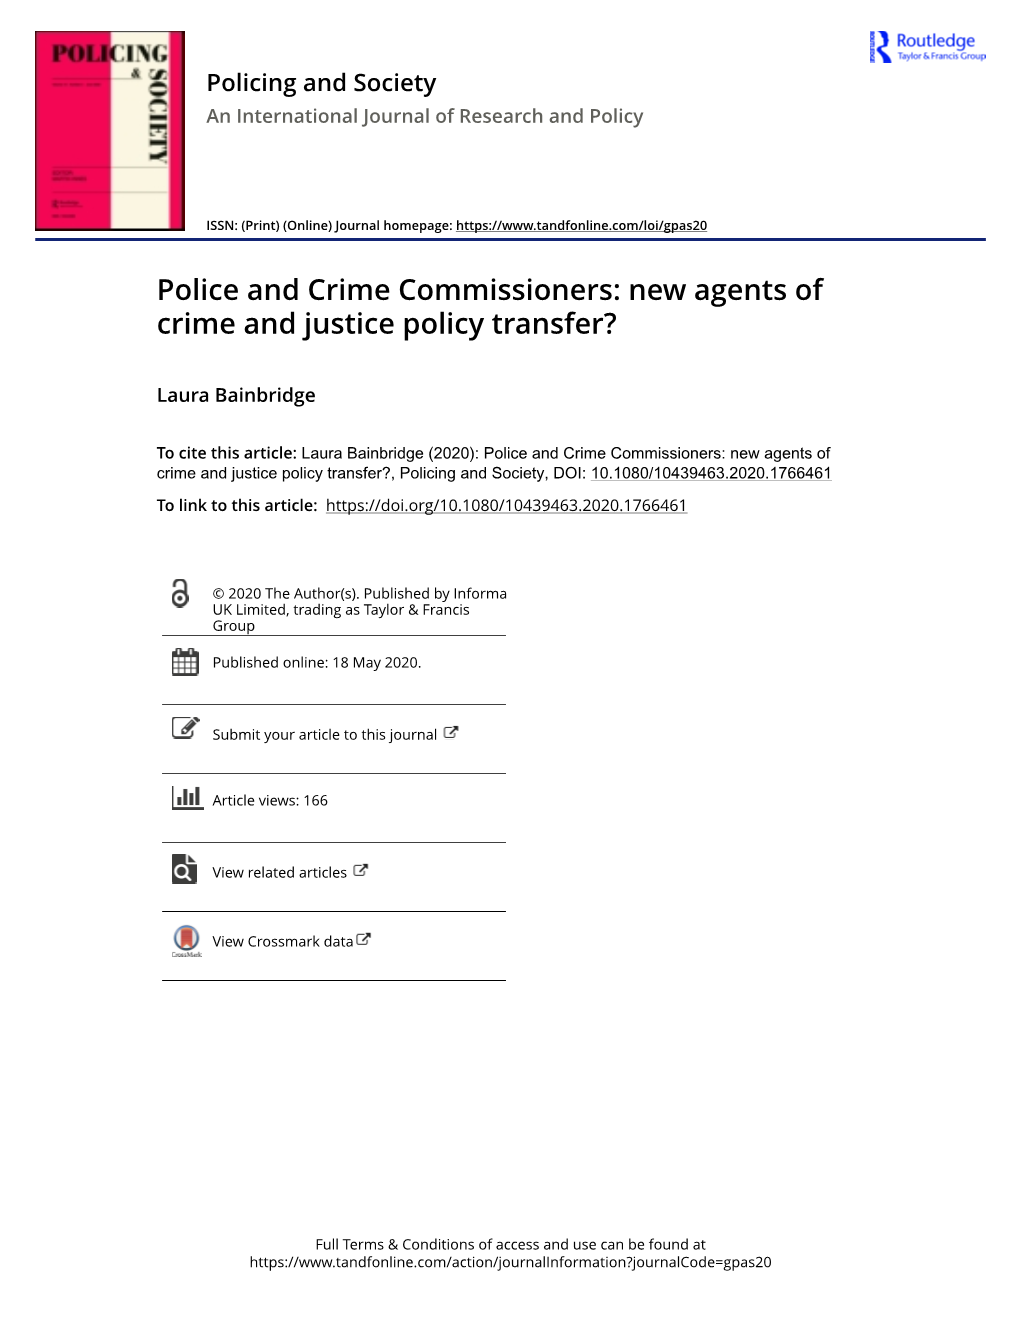 Police and Crime Commissioners: New Agents of Crime and Justice Policy Transfer?